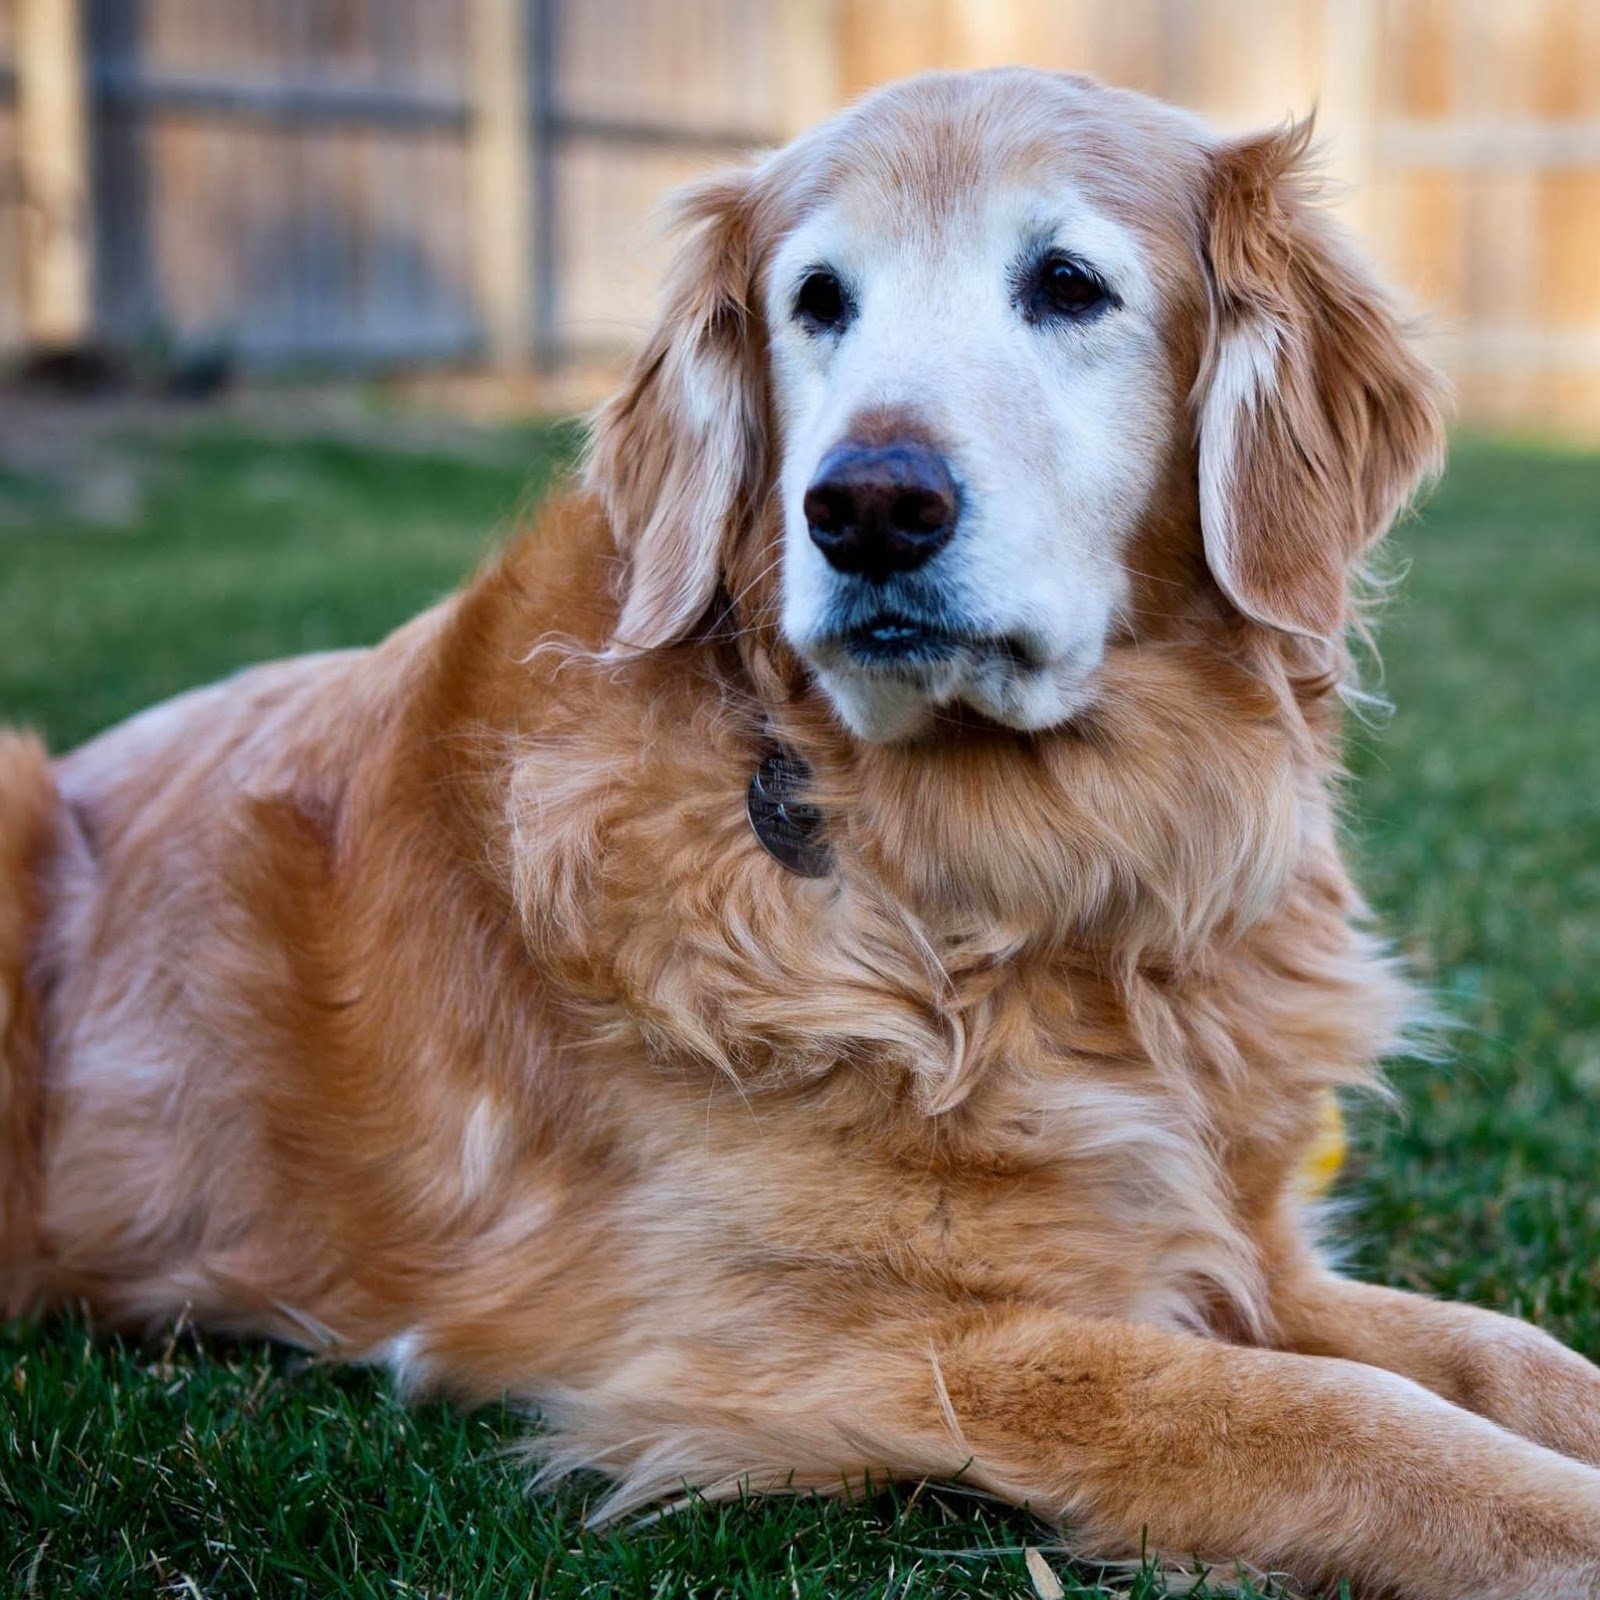 Health Issues: Health Issues With Golden Retrievers